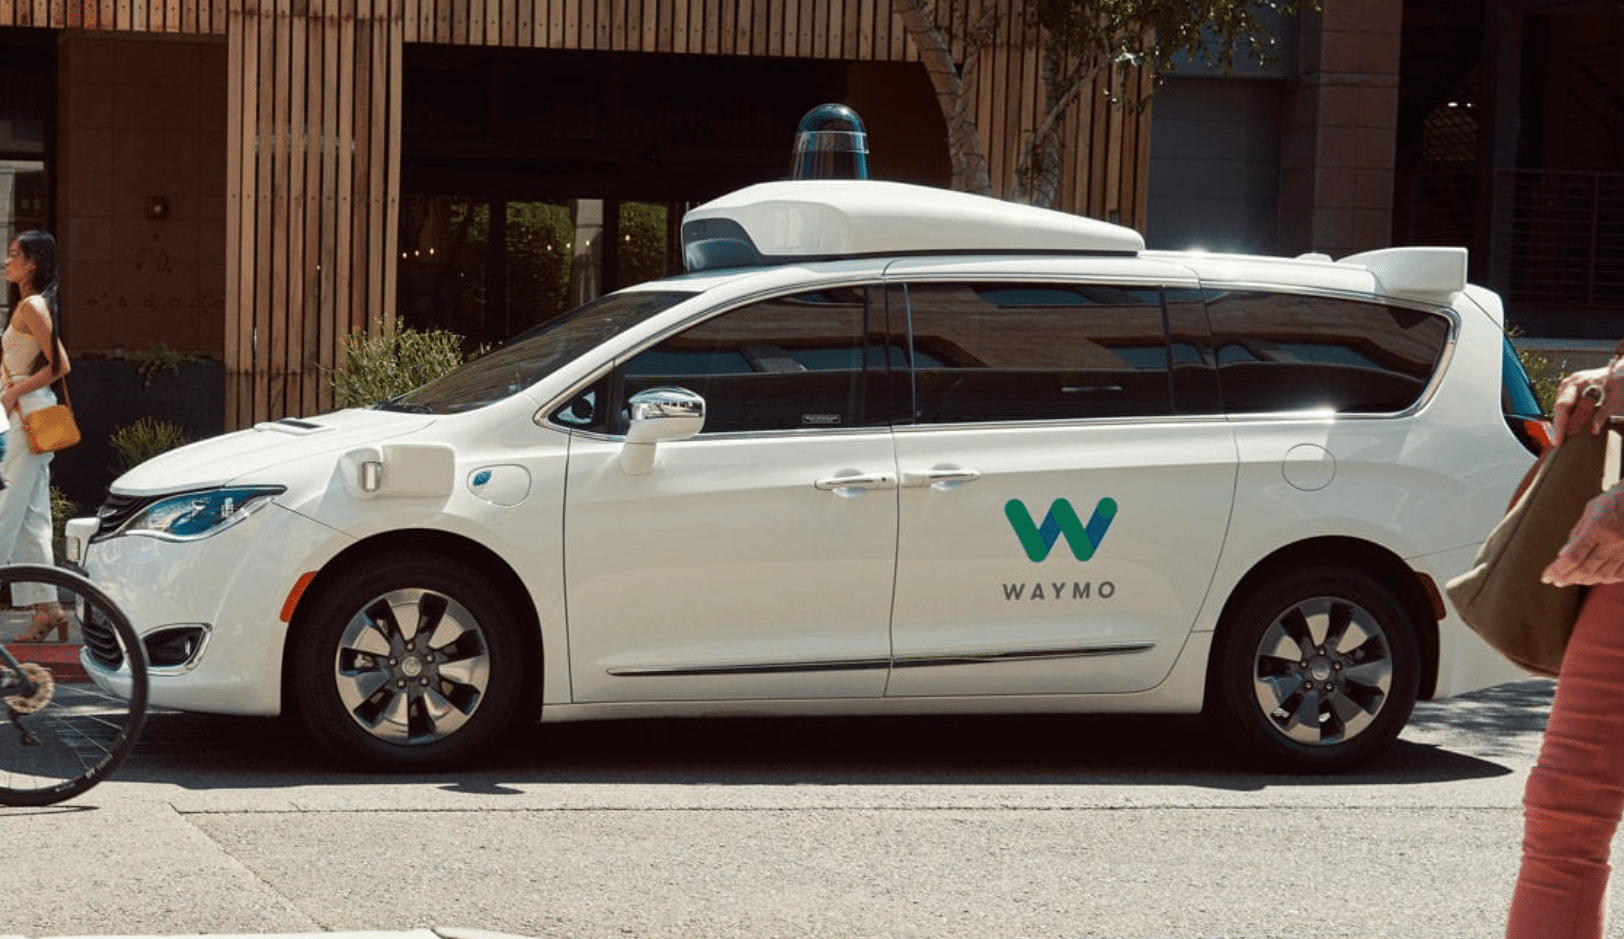 Waymo, the autonomous vehicle company, has announced that its driverless cars have completed one million rider-only miles on public roads across multiple U.S. cities, including San Francisco and Phoenix, without human intervention.